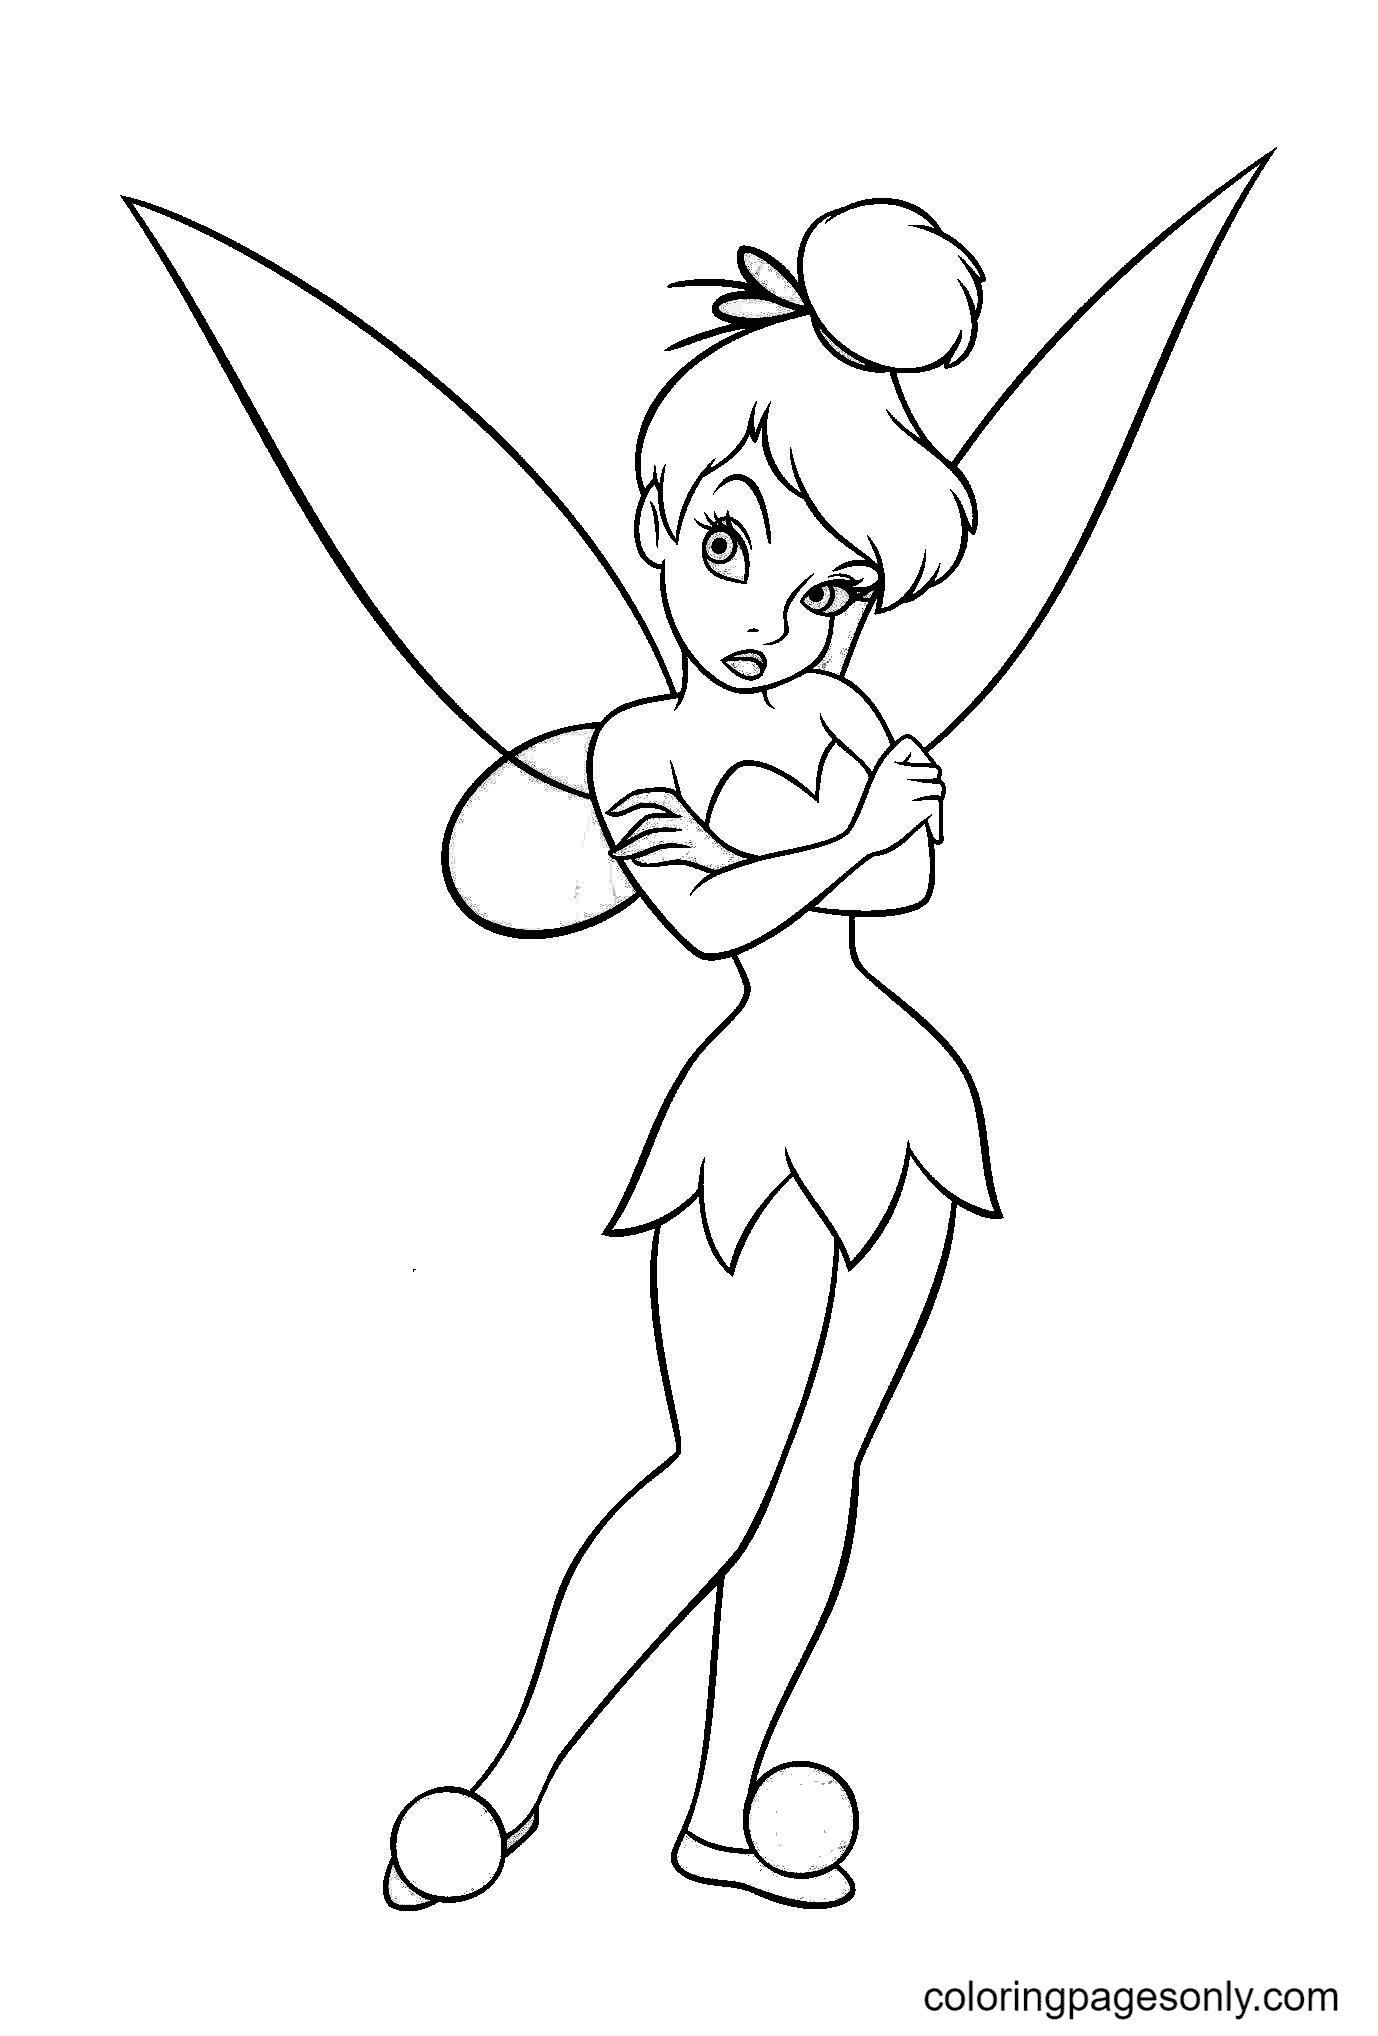 Awesome Tinkerbell Coloring Page